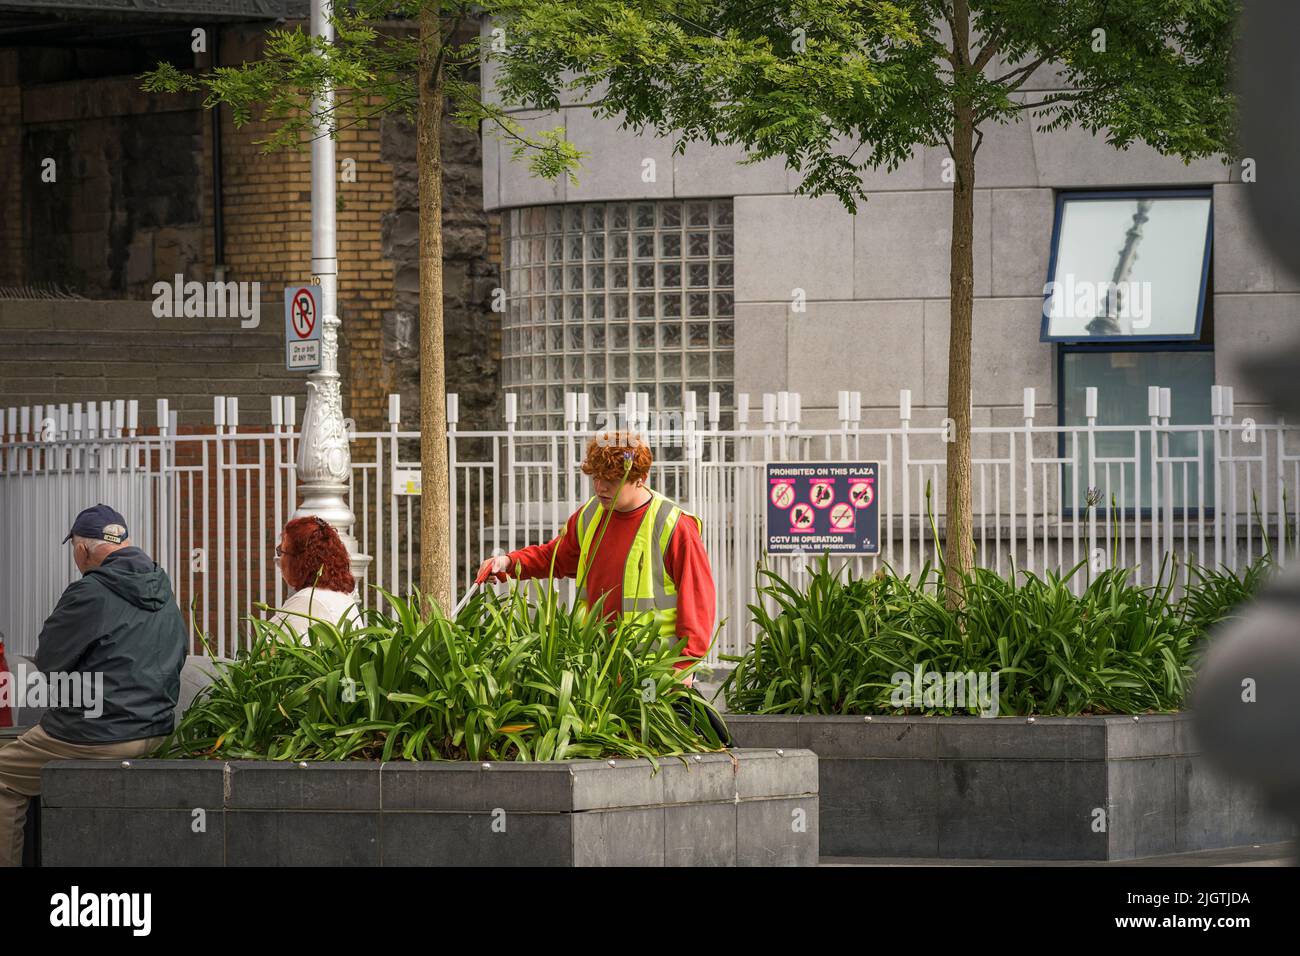 Young red-headed man, council worker, in hi-viz jacket with a litter picker. Dublin. Ireland. Stock Photo